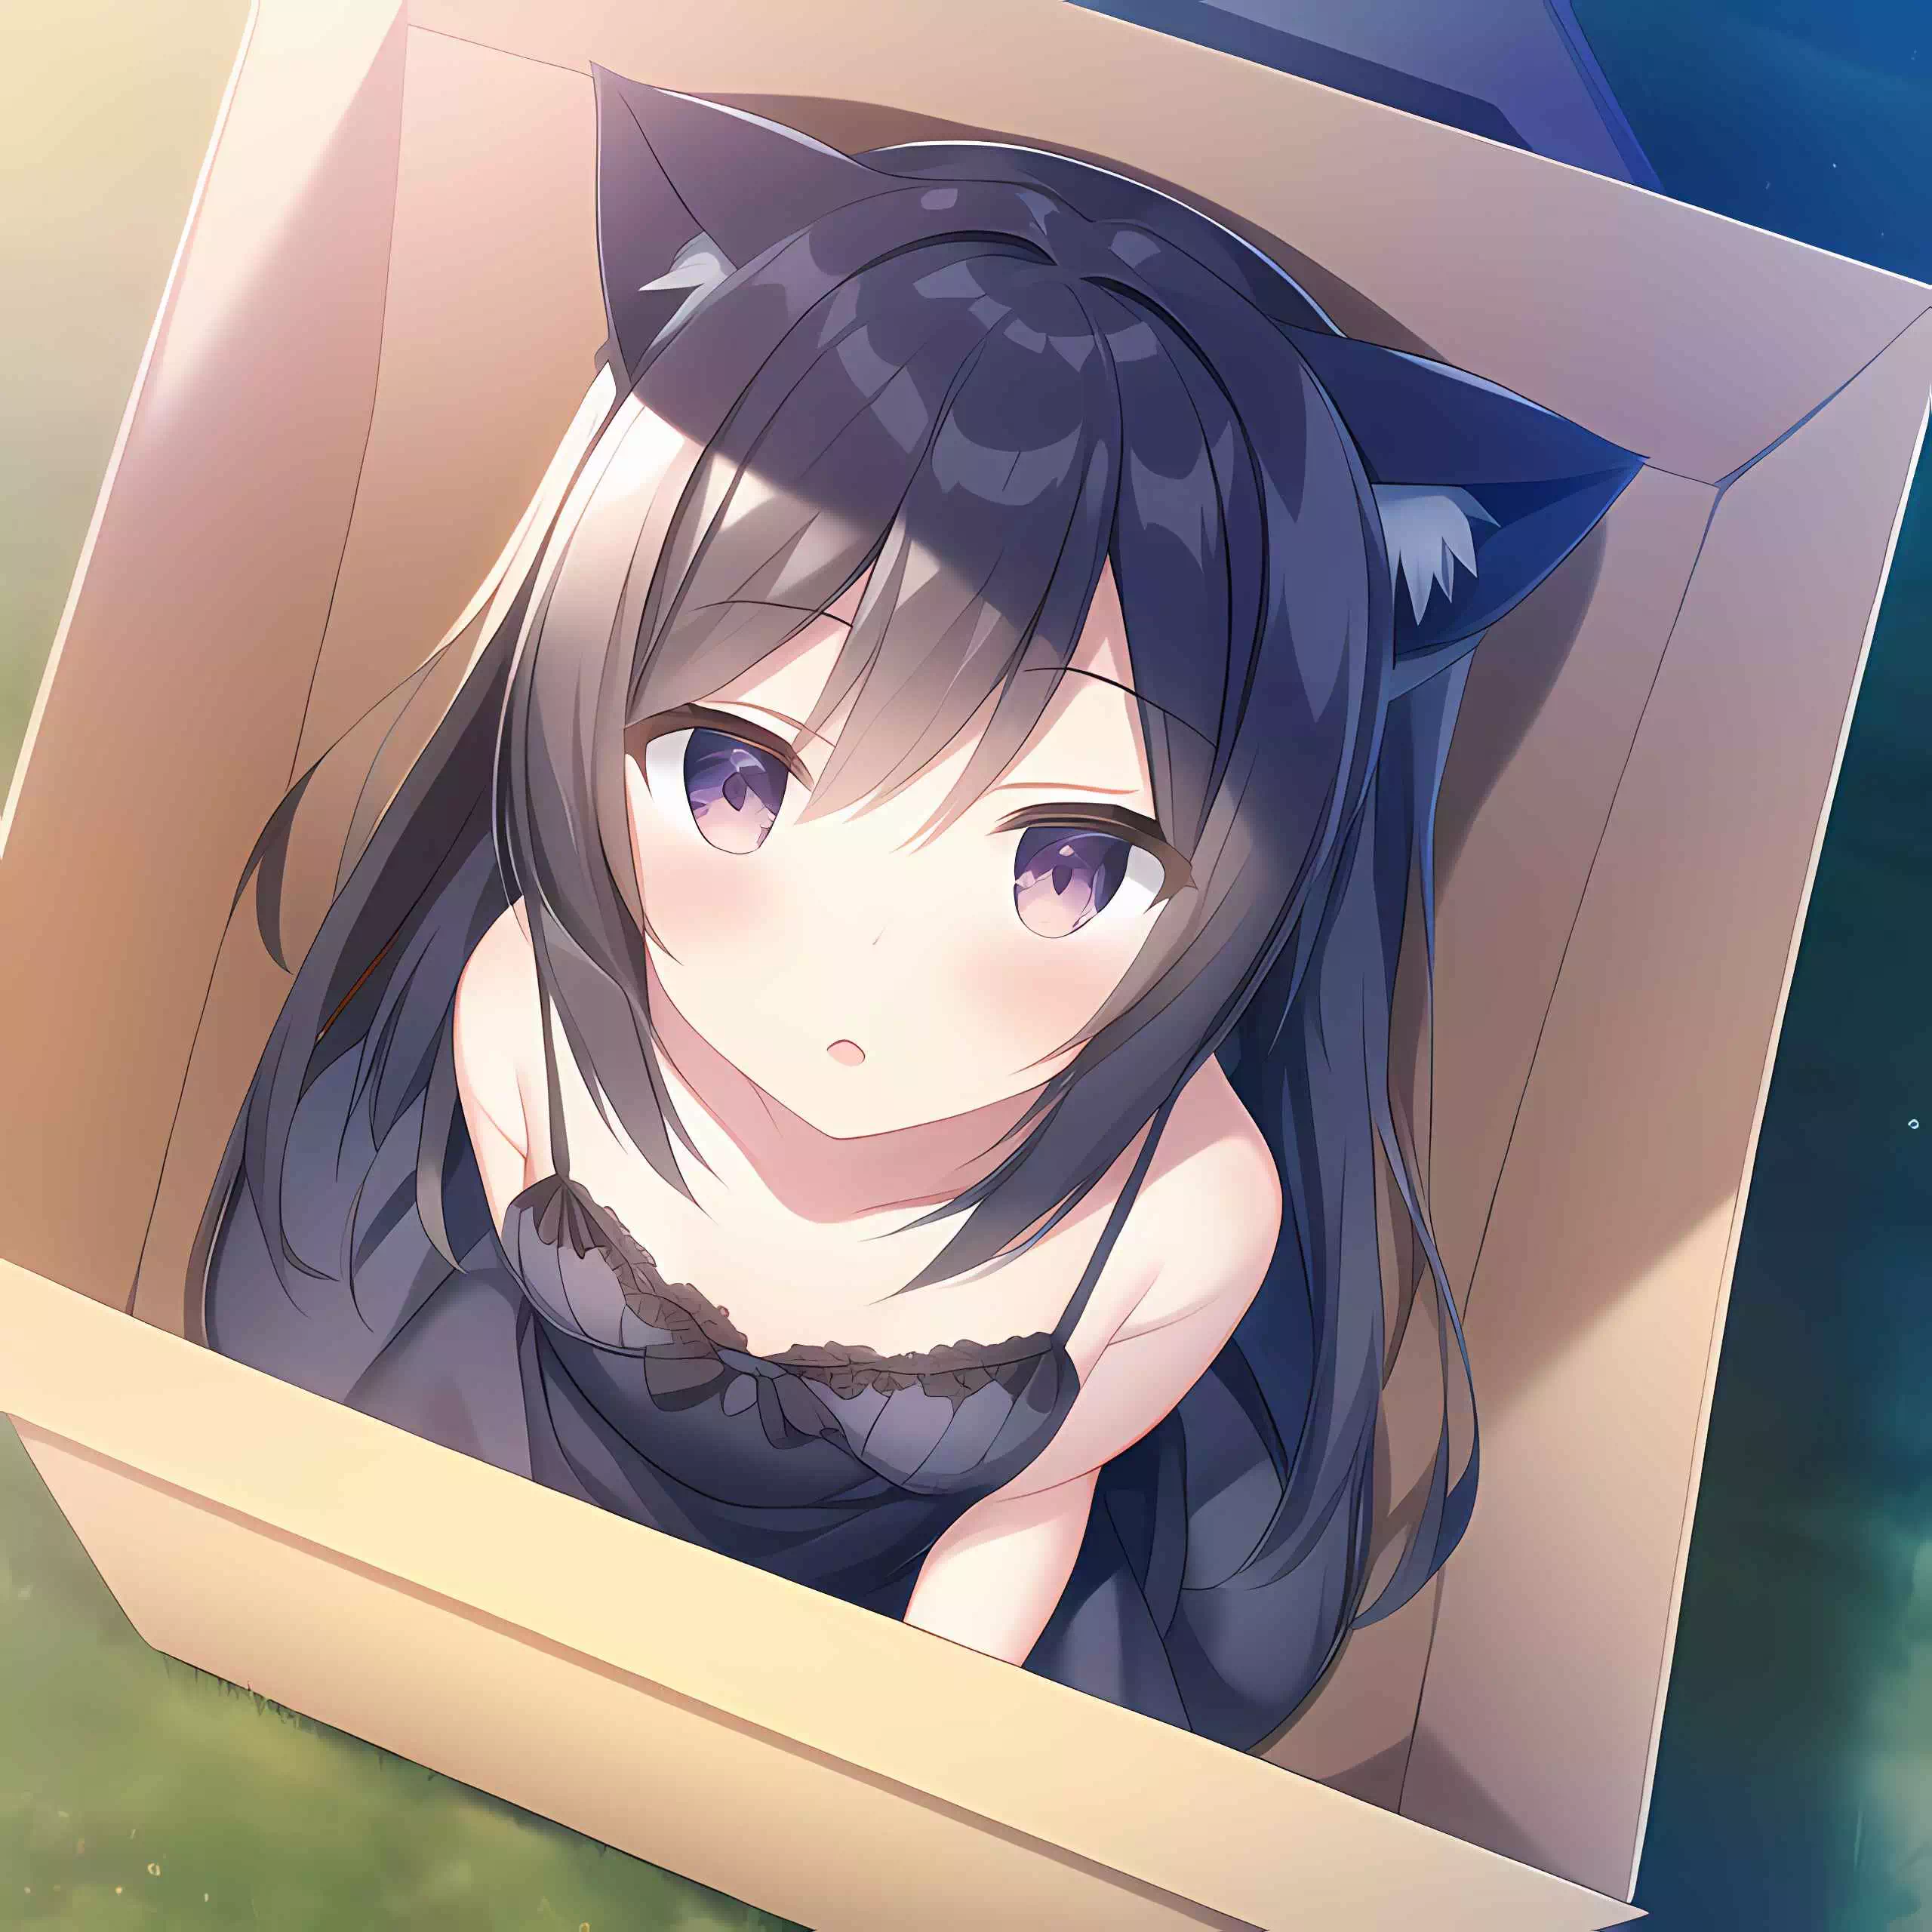 Abandoned Catgirls in boxes